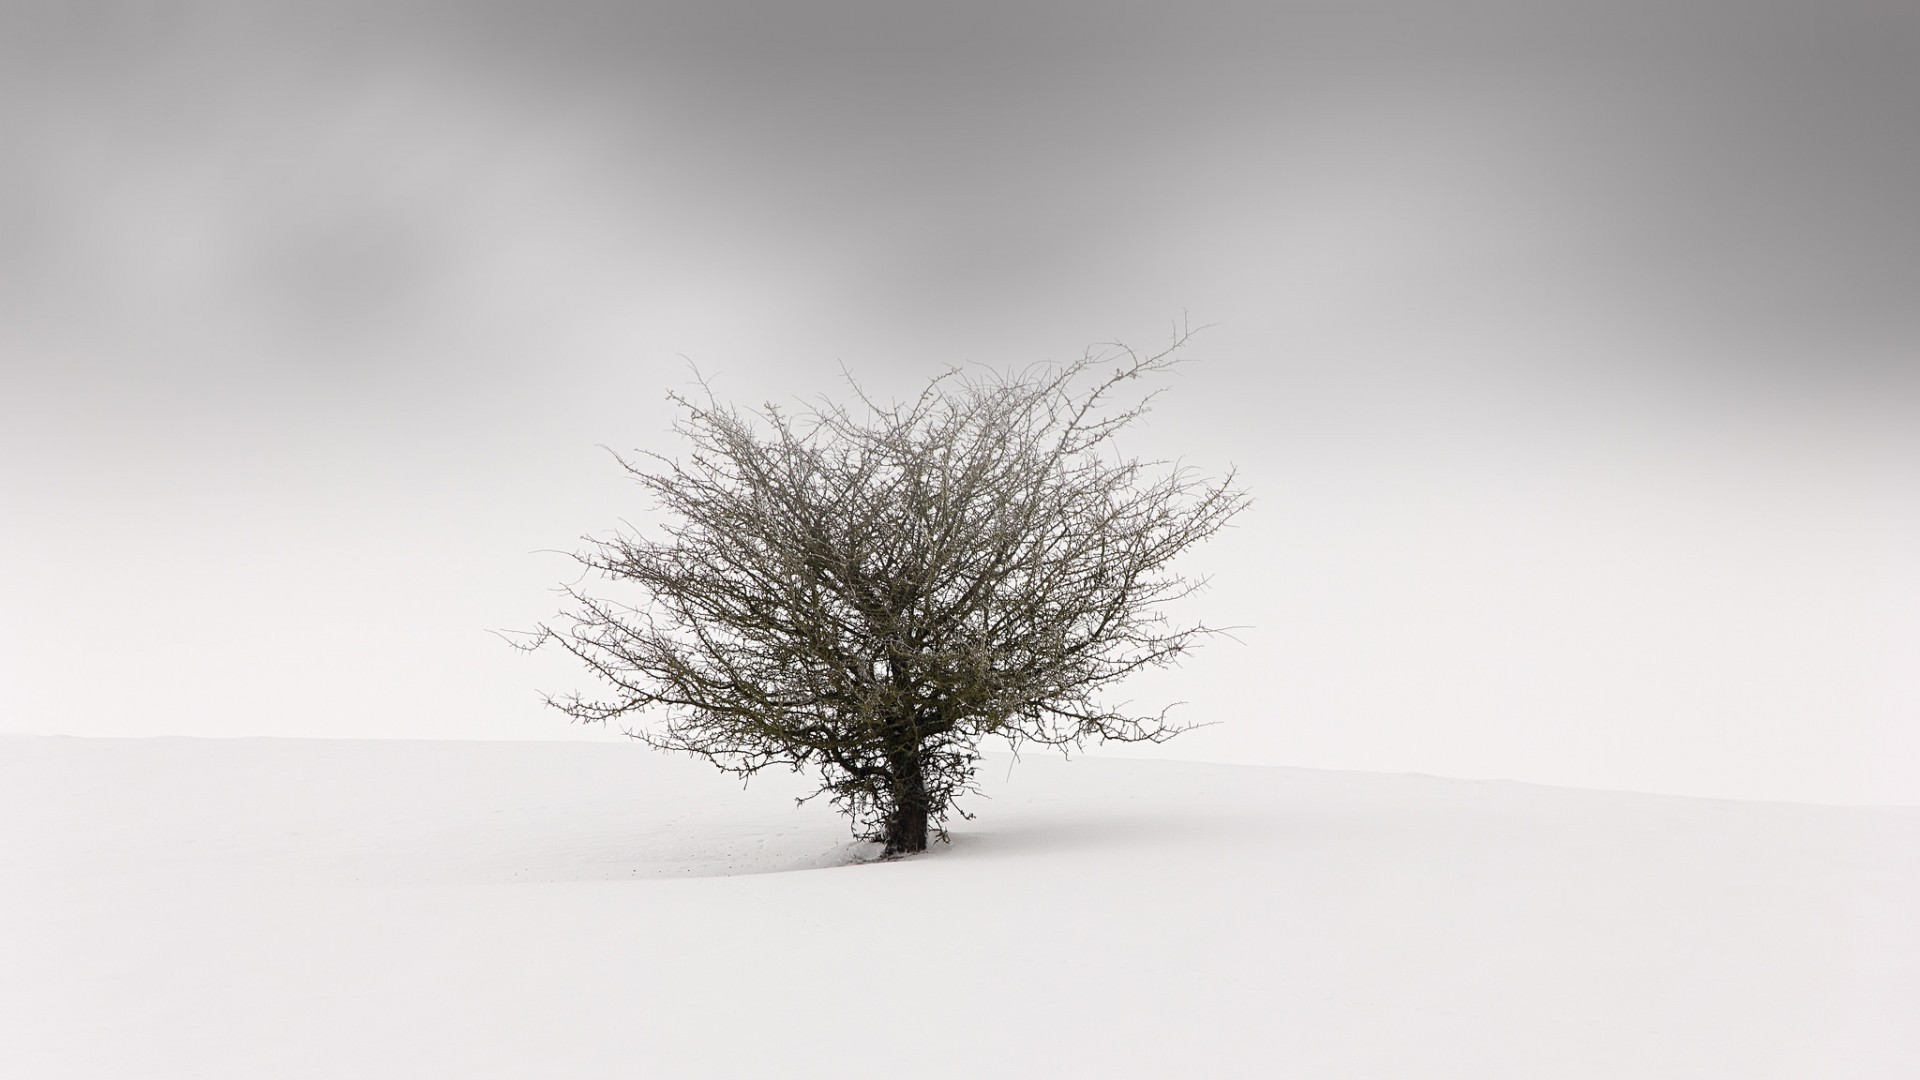 General 1920x1080 nature landscape minimalism trees winter snow mist branch blurred white gray overcast field outdoors cold plants